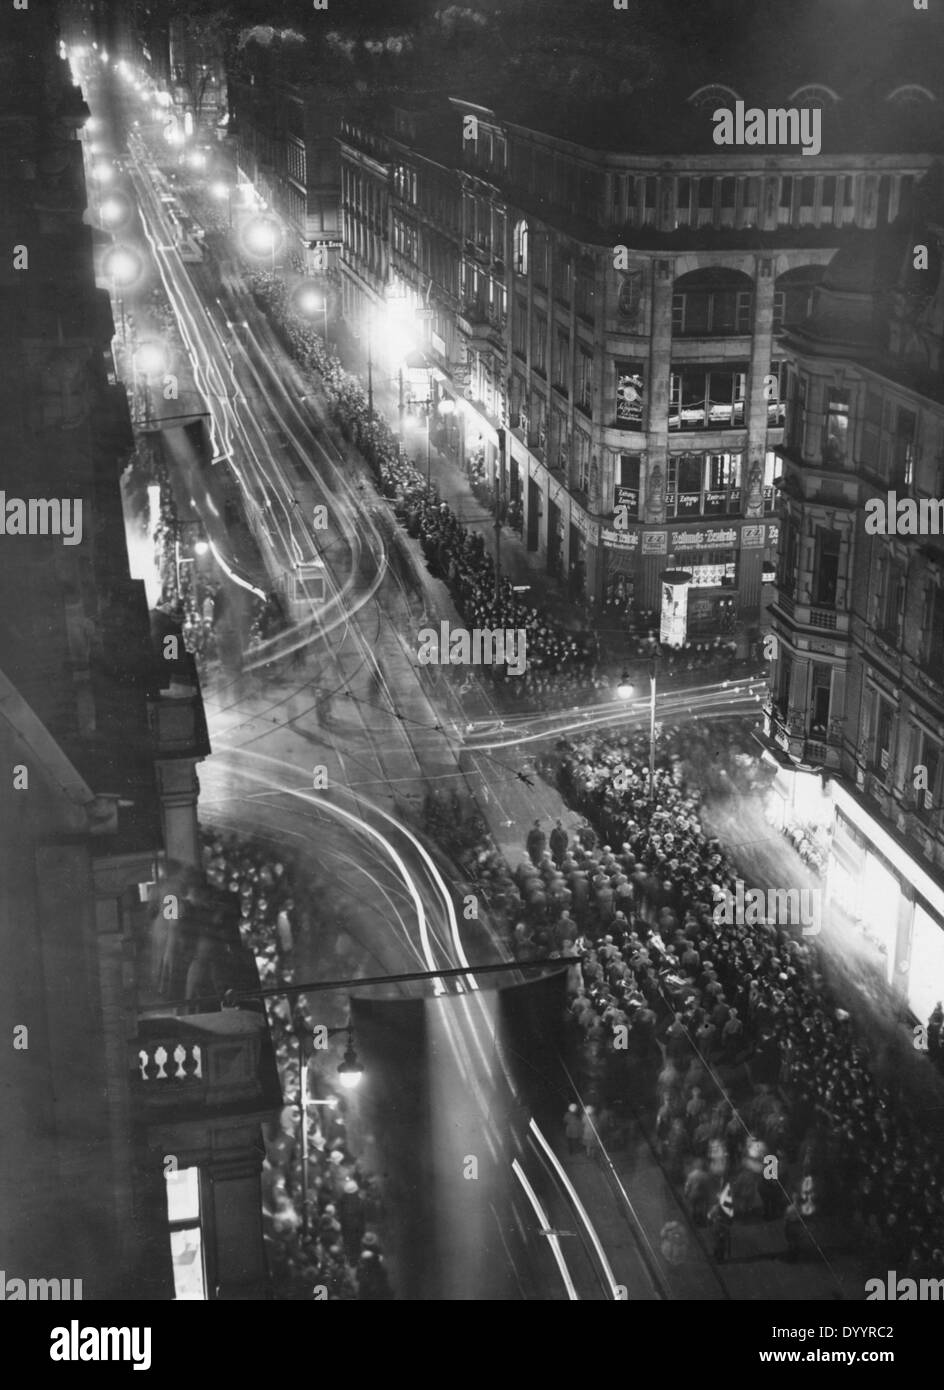 Torchlight parade in Berlin on 21.03.1933 Stock Photo